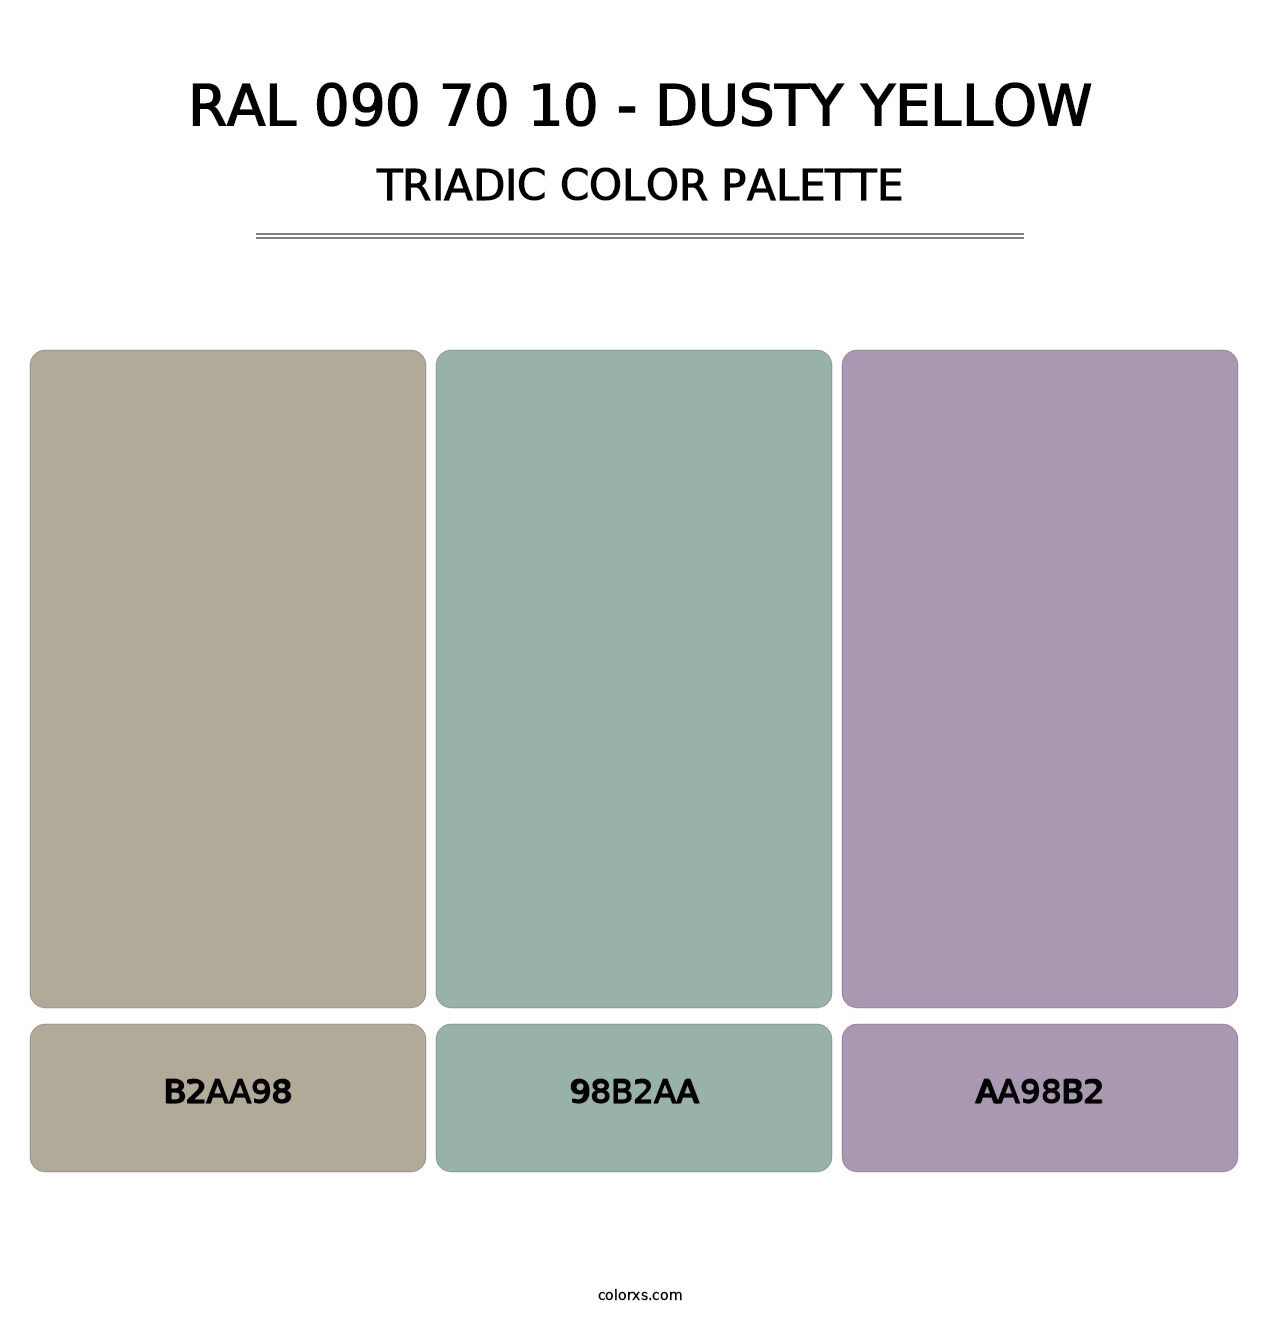 RAL 090 70 10 - Dusty Yellow - Triadic Color Palette